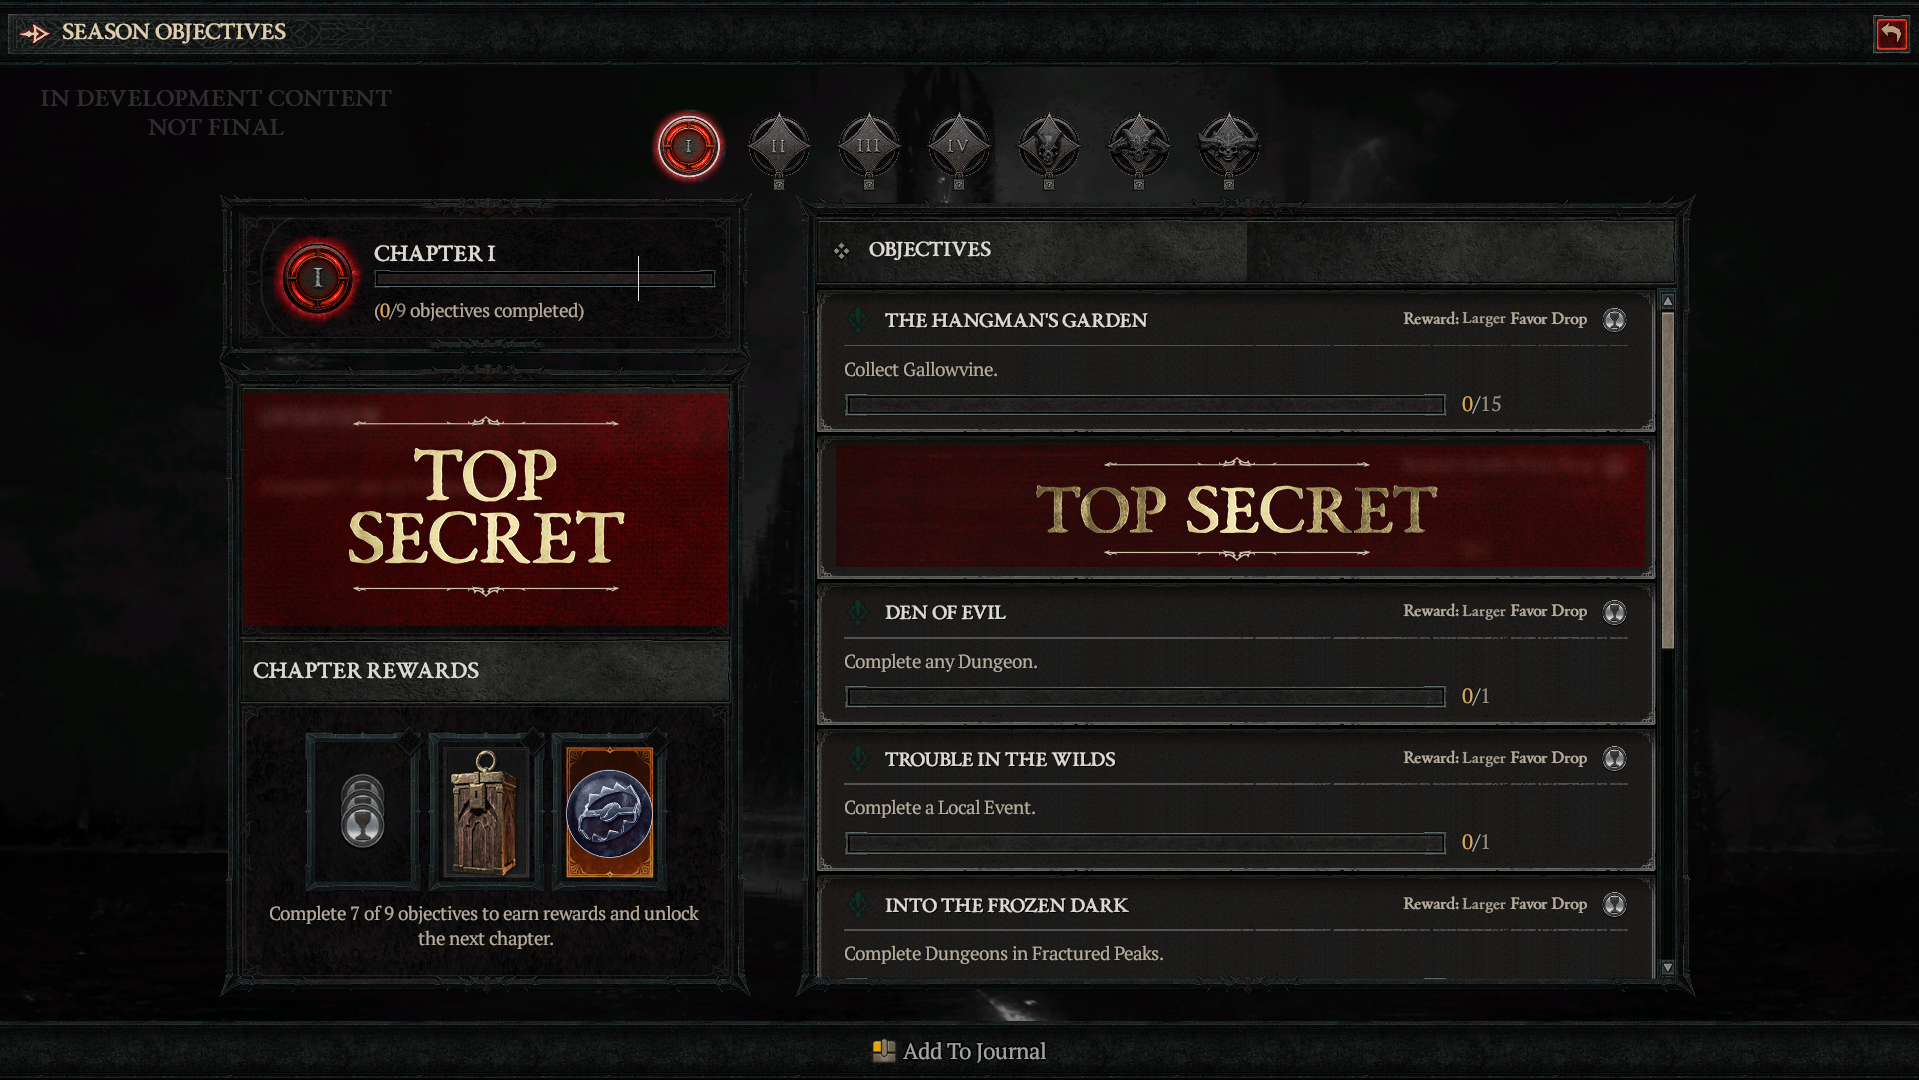 Objectives and rewards for a Season are listed out in Diablo IV (2023), Blizzard Entertainment